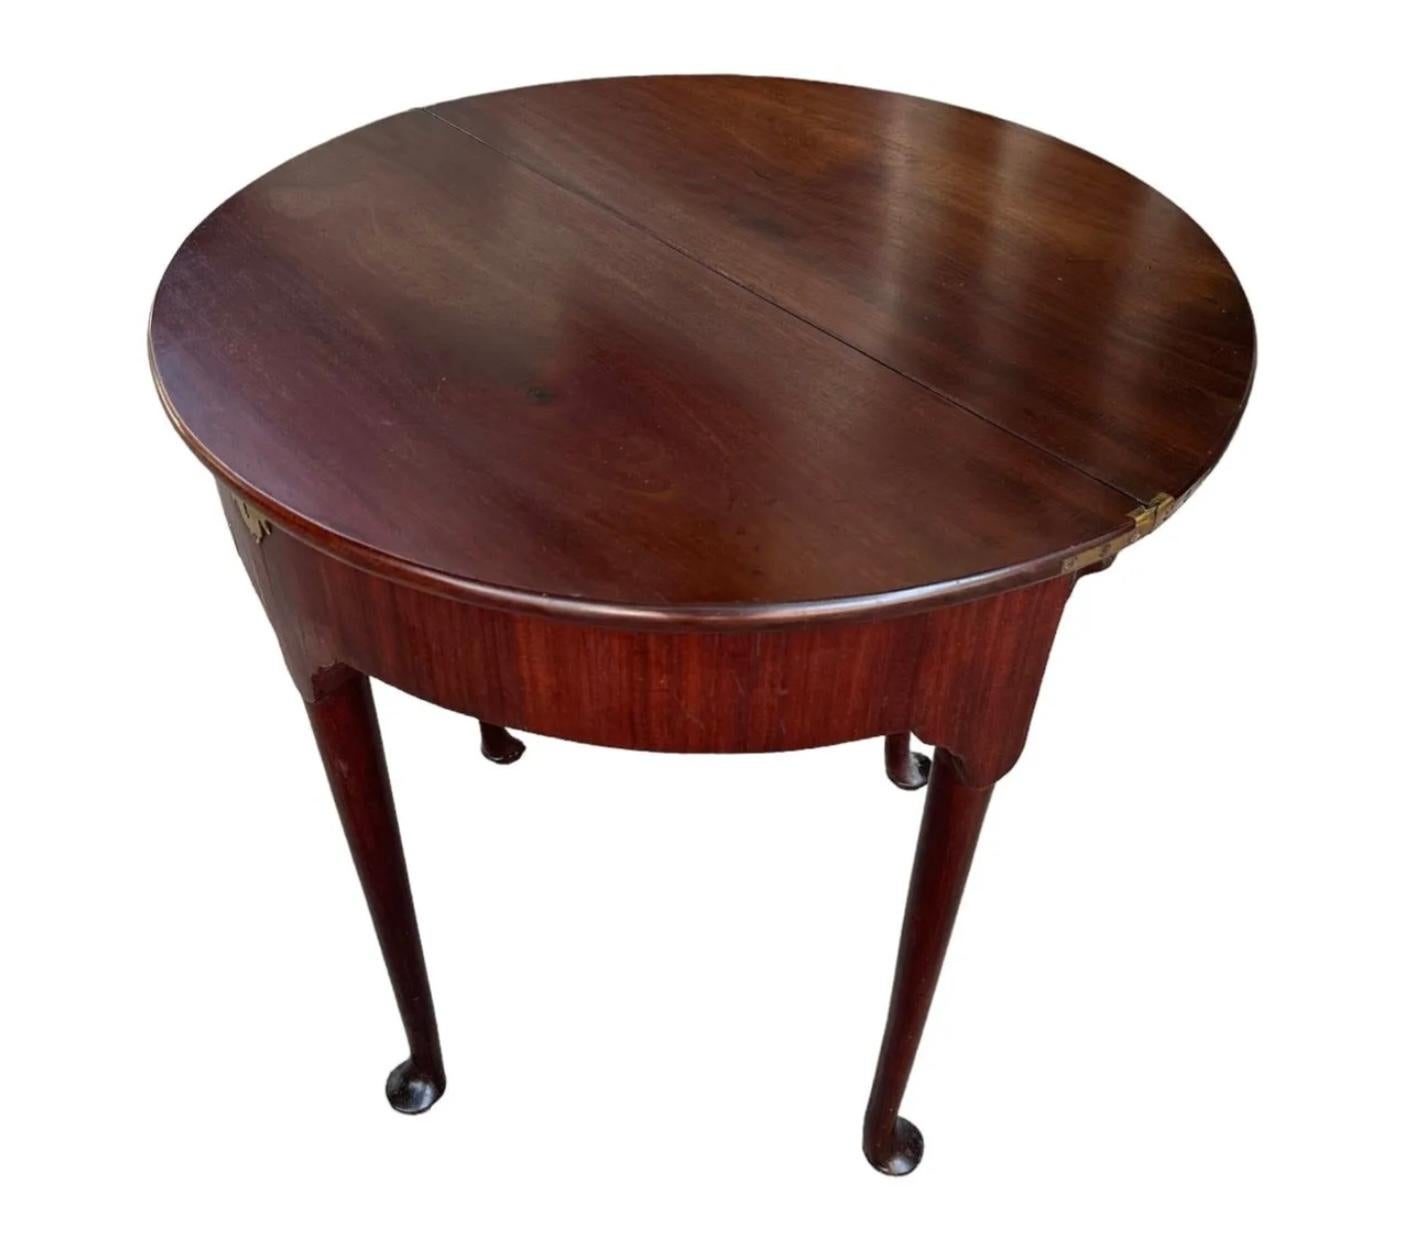 English 18th Century Queen Anne Mahogany Demi-Lune Flip Top Table For Sale